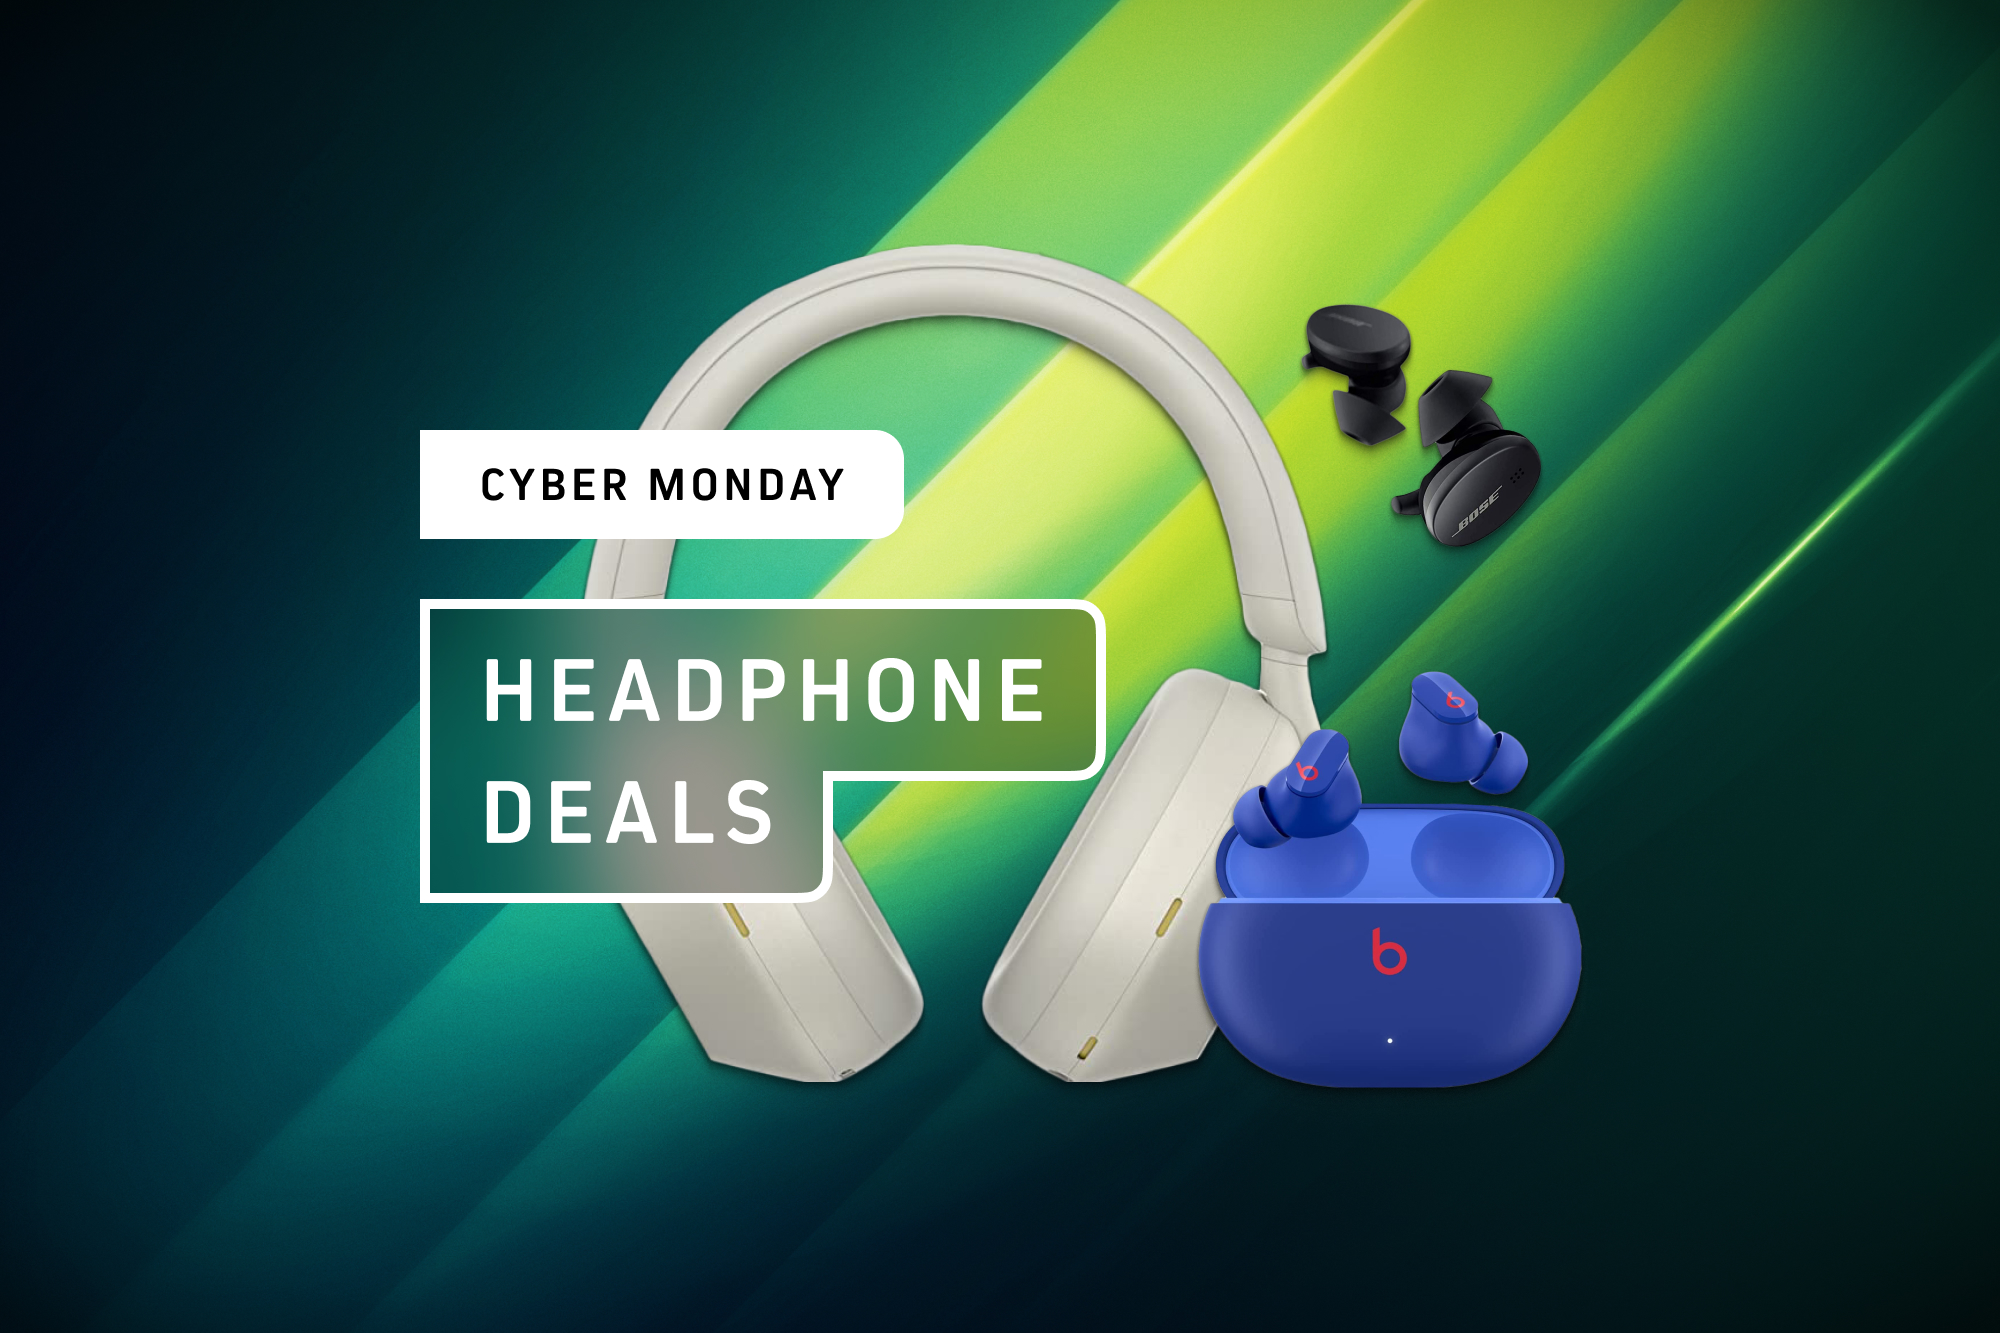 The best Cyber Monday headphone deals for 2022